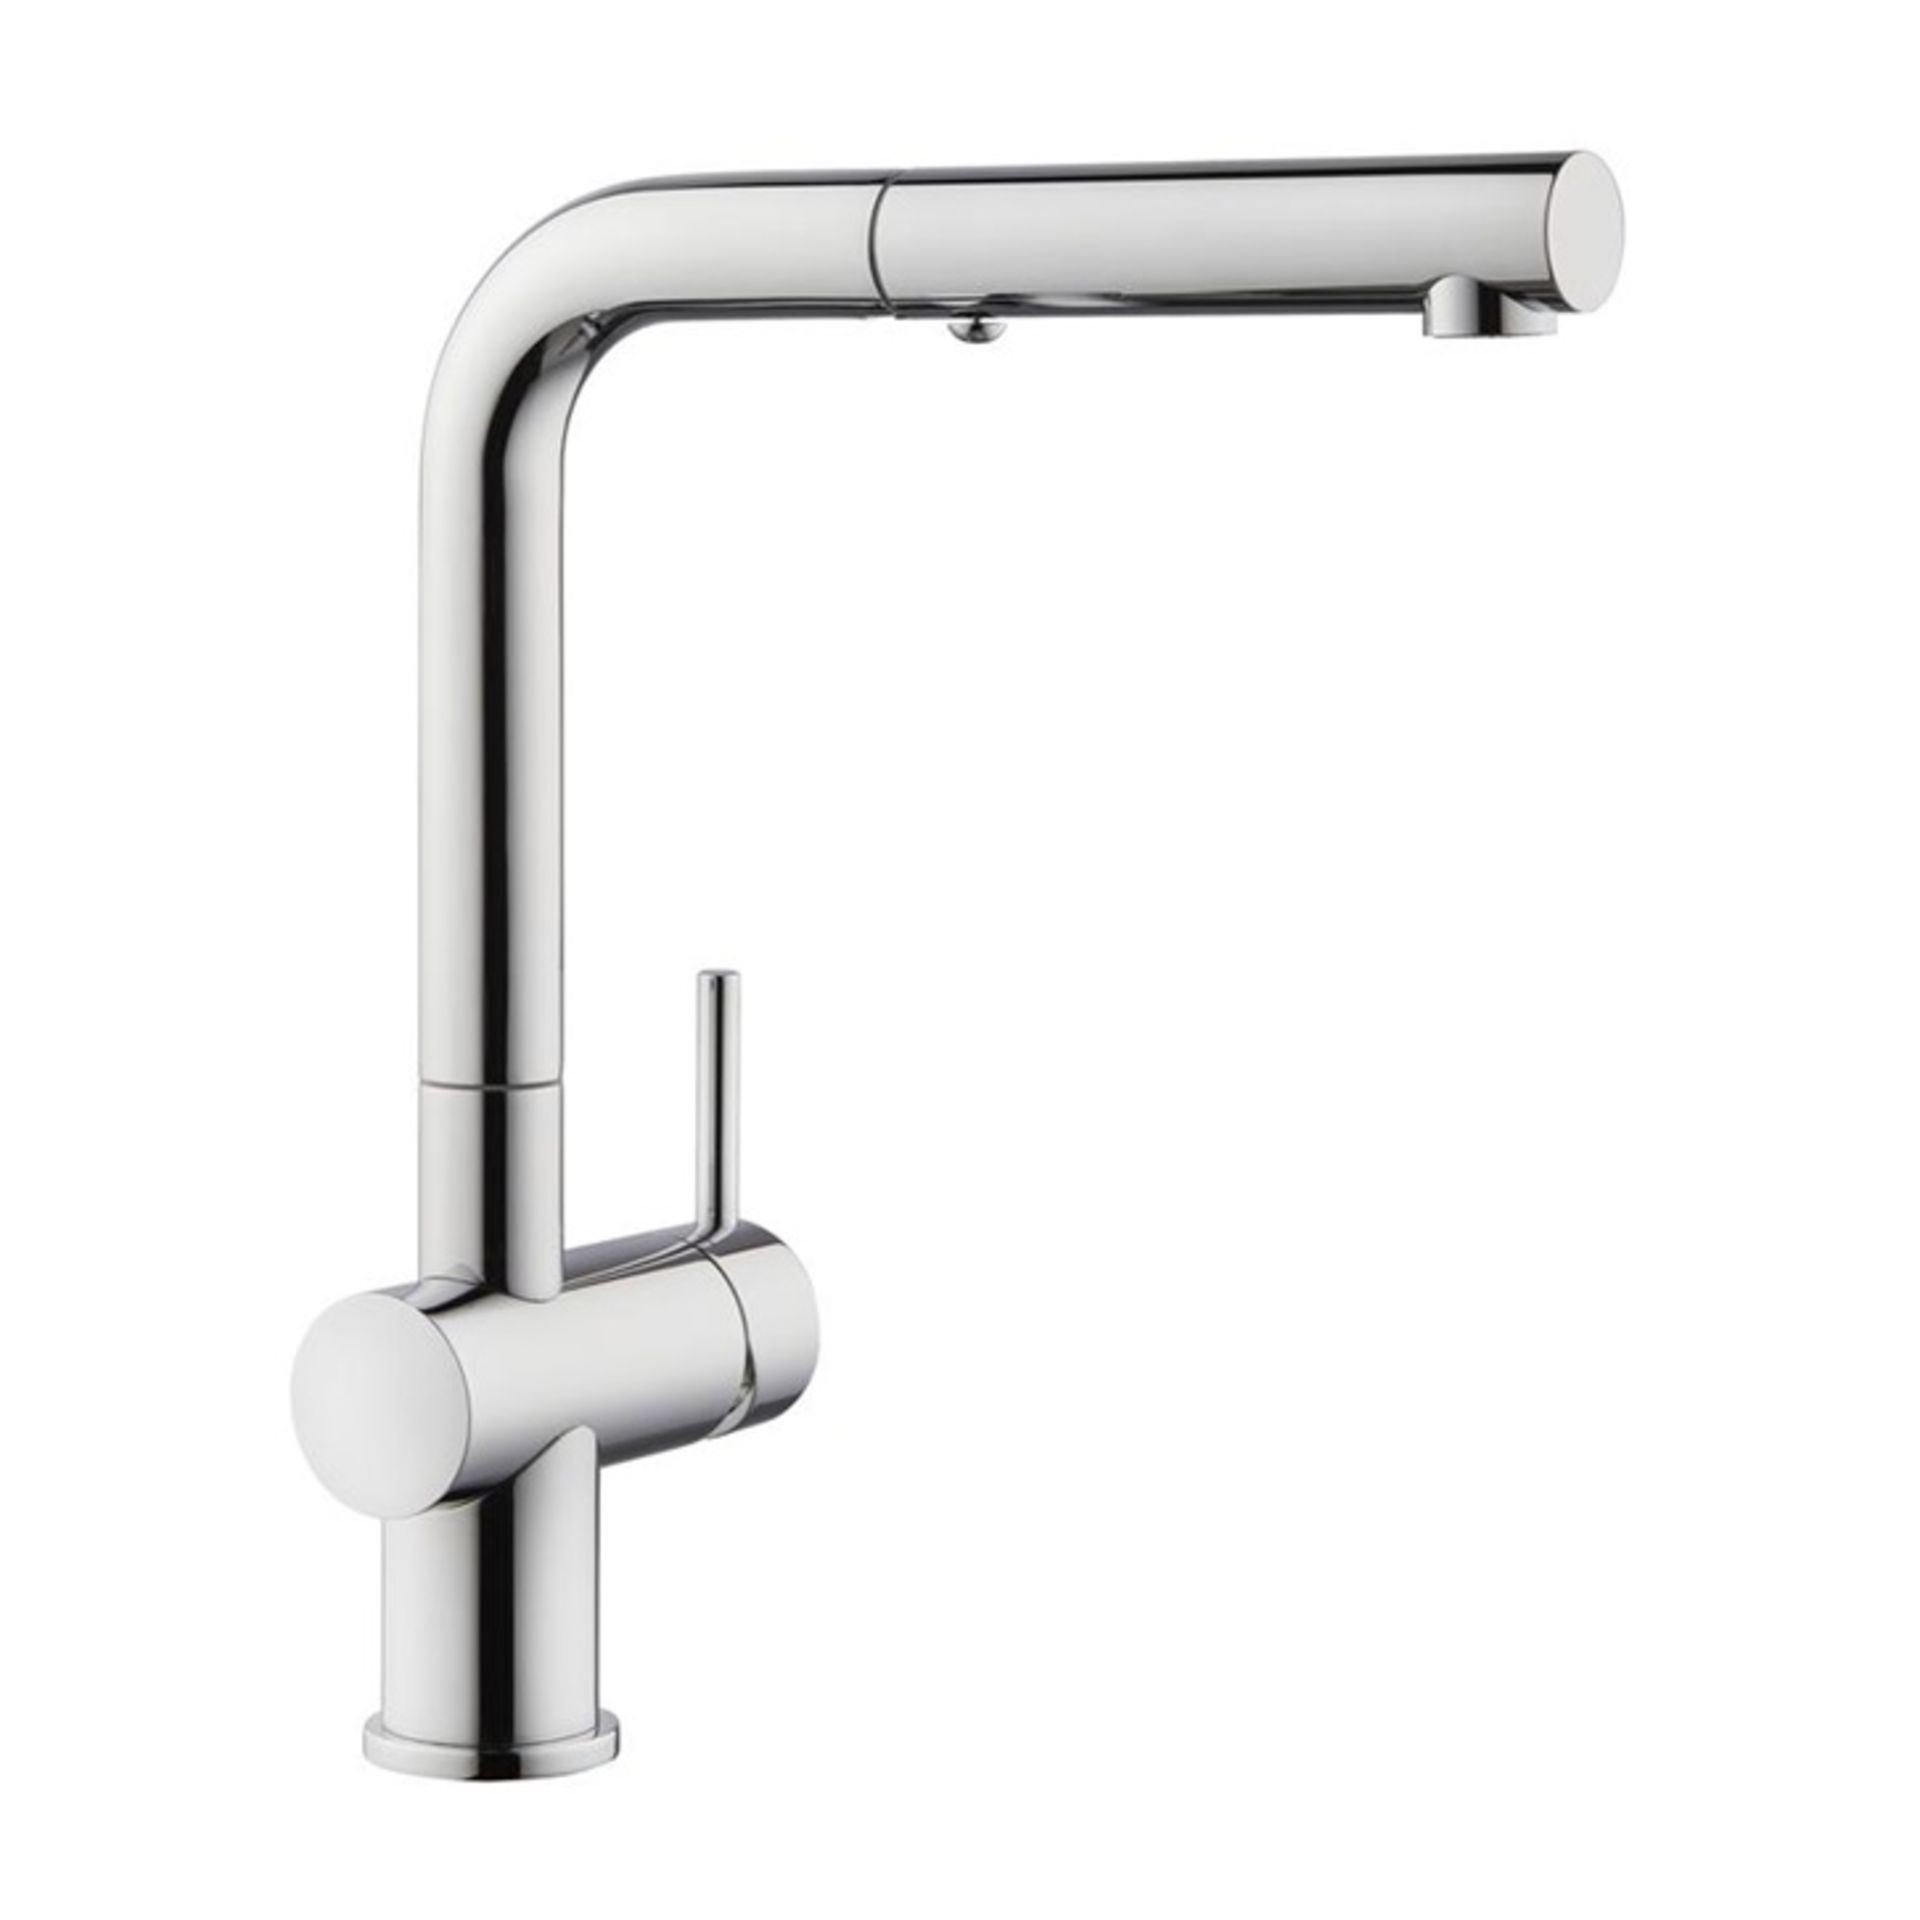 NEW (MF84) Franke Active Plus Polished Chrome Mixer Tap. Add geometric style to a design with this